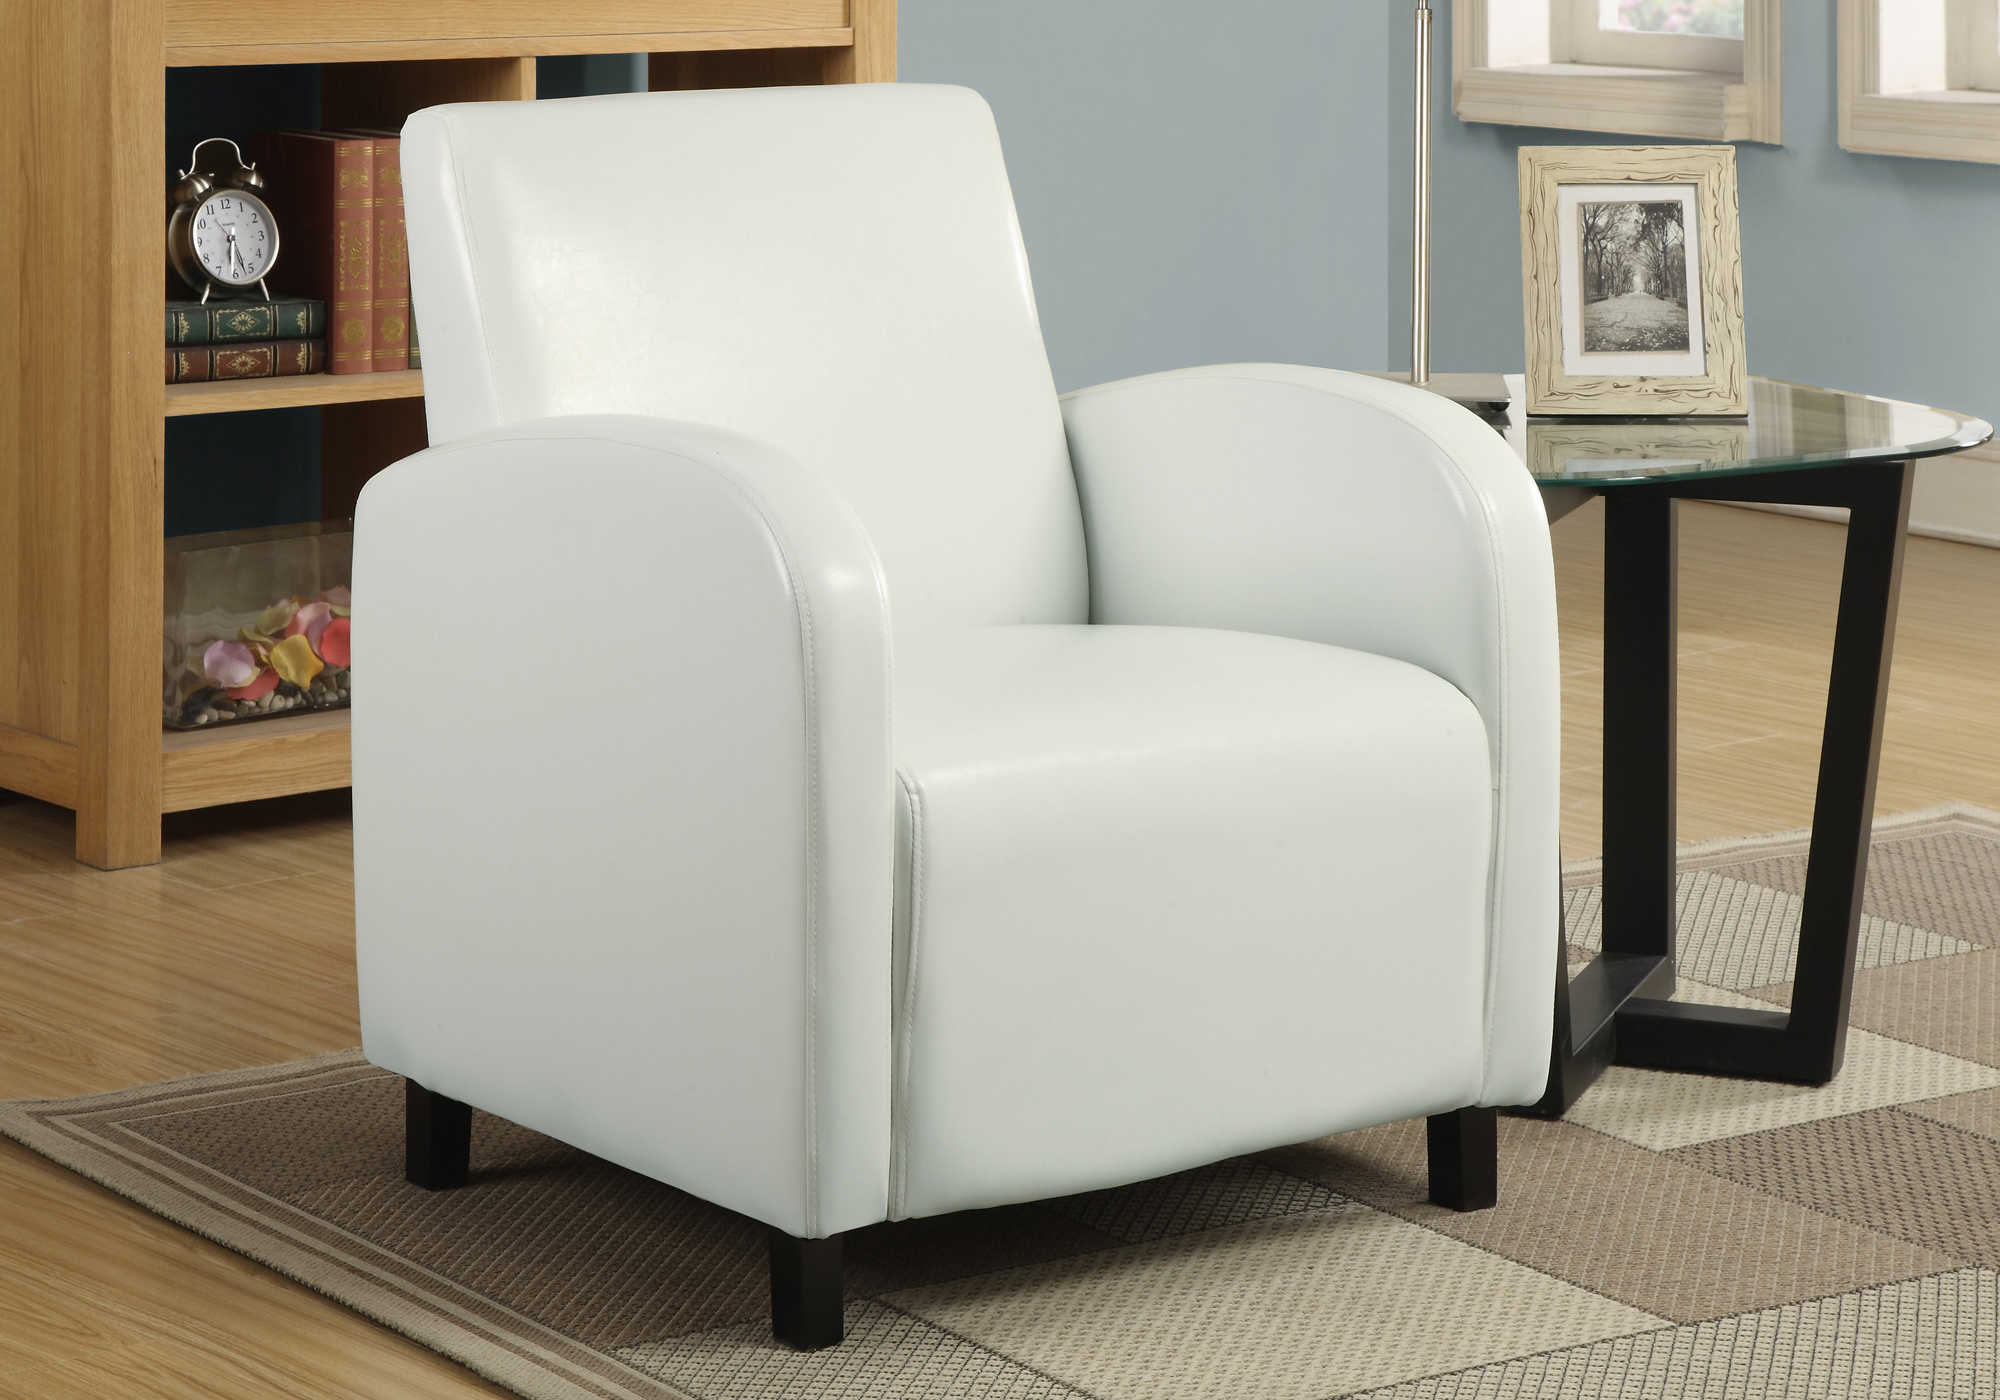 ACCENT CHAIR - WHITE LEATHER-LOOK FABRIC